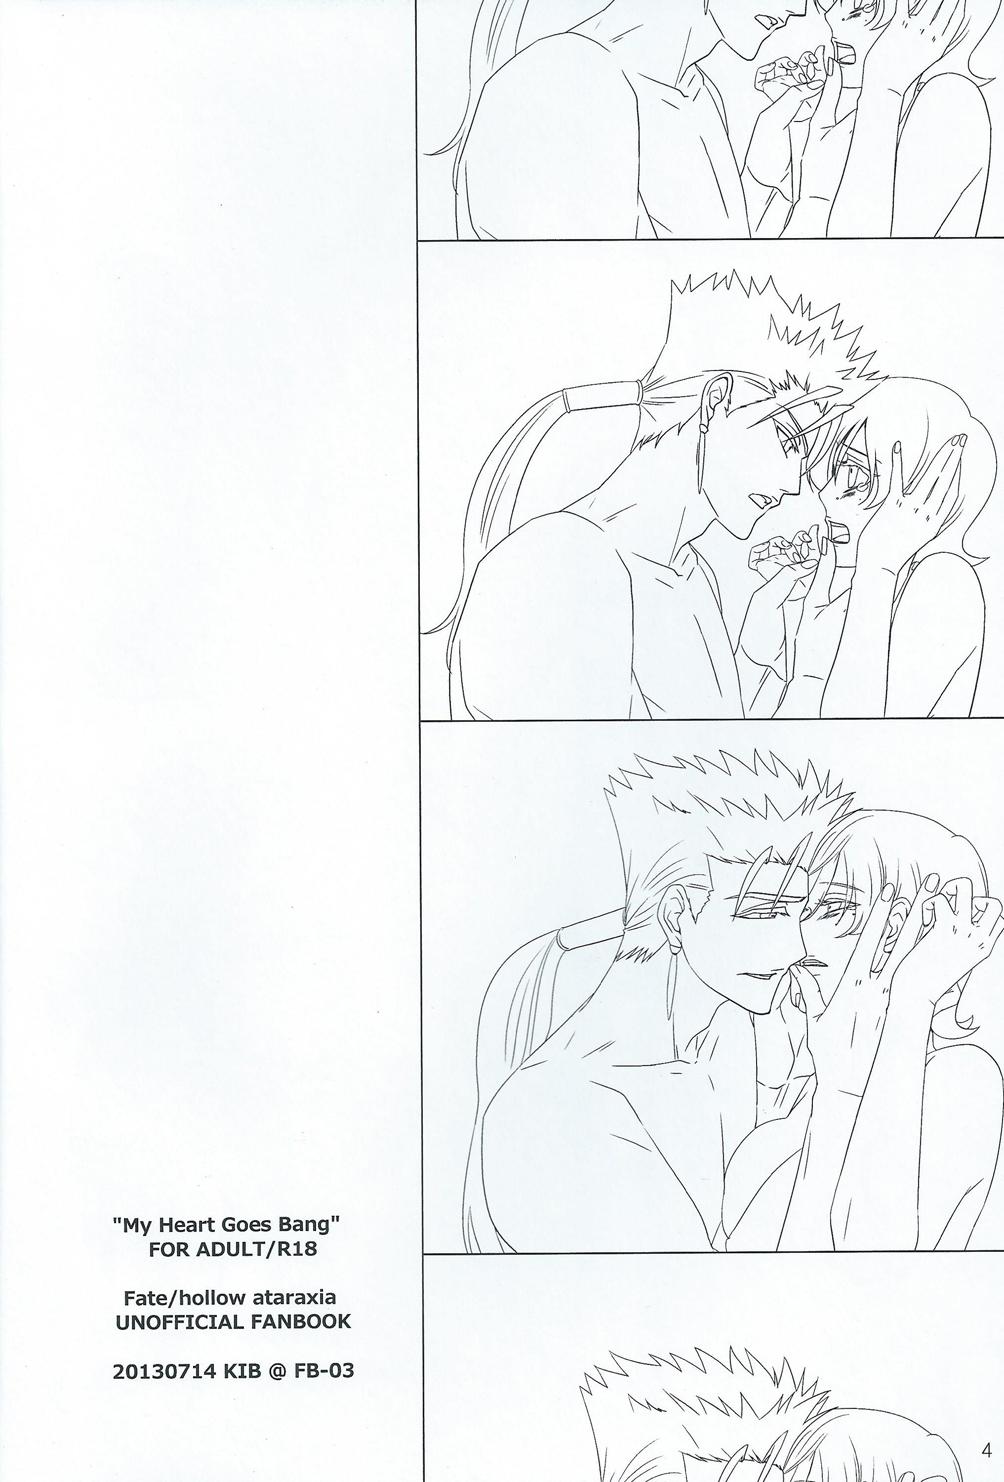 Real Amateurs My Heart Goes Bang - Fate hollow ataraxia Couples - Page 3